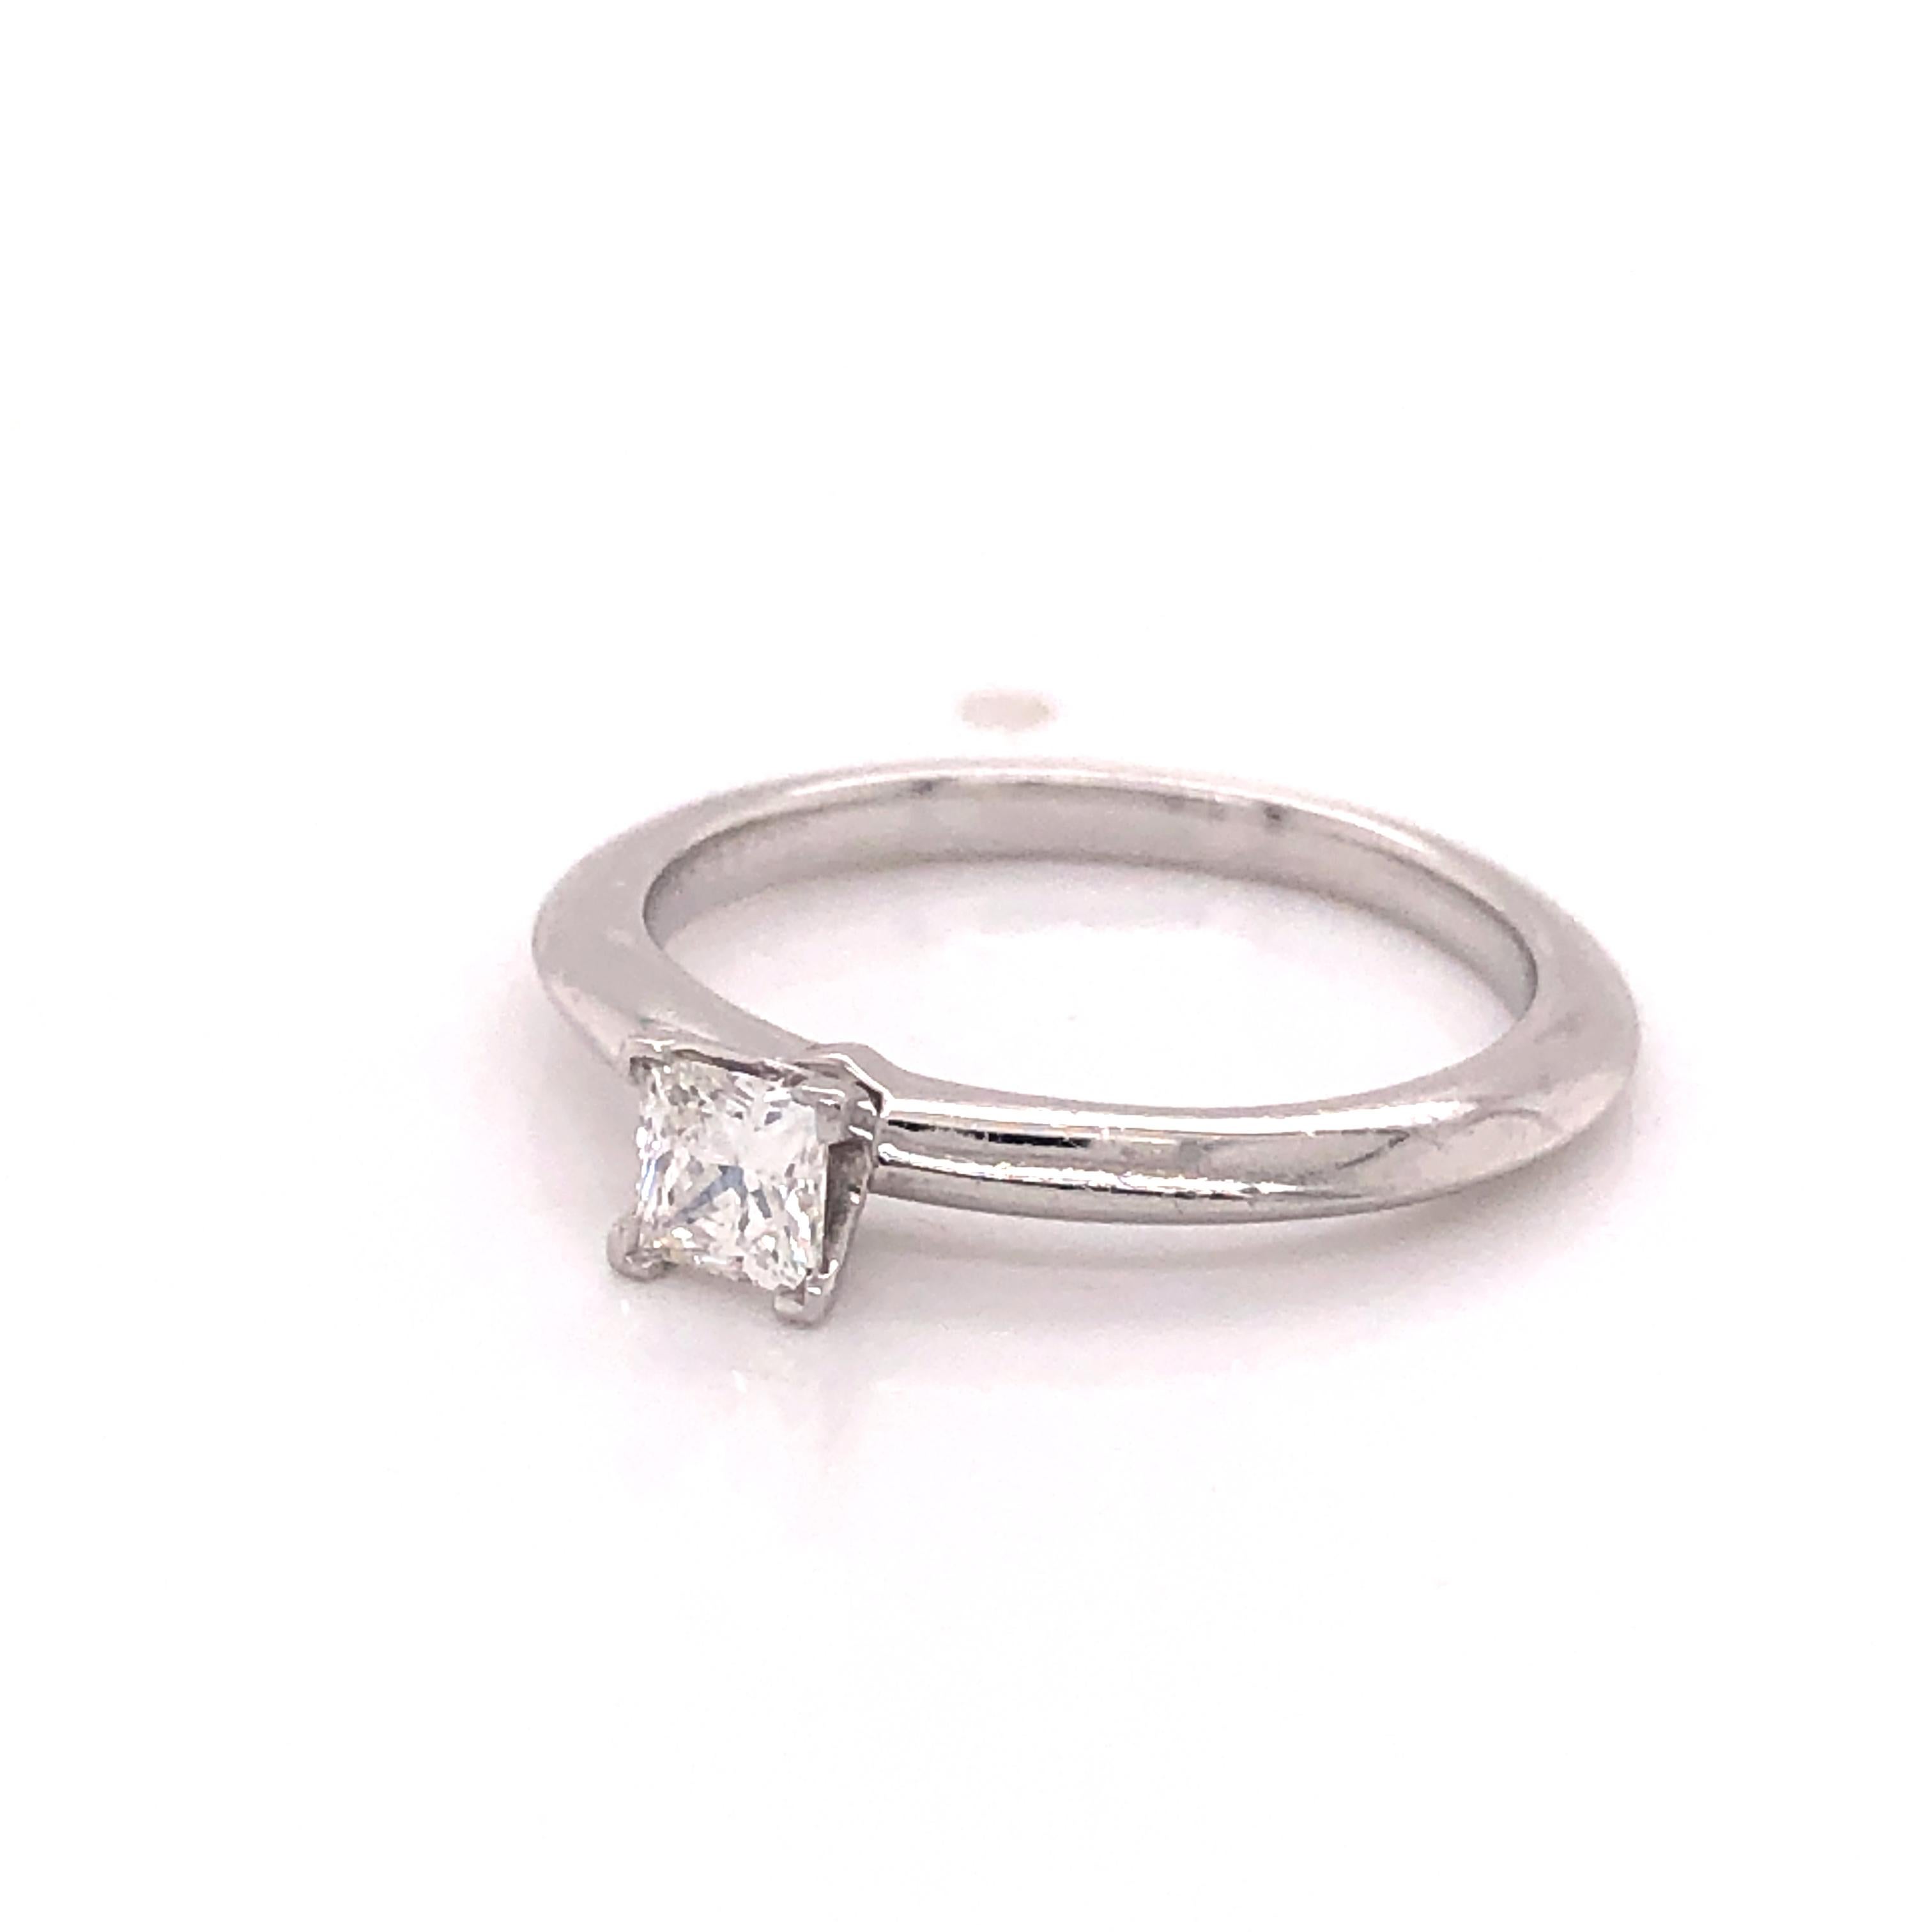 Gorgeous and simple design from famed designer Tiffany & Co. The ring is crafted in platinum and this solitaire style ring holds a 0.23 ct princess cut diamond. The diamond measures 3.50 x 3.49 x 2.37 mm (L,W,D). The stone weighs .23 carat and is a